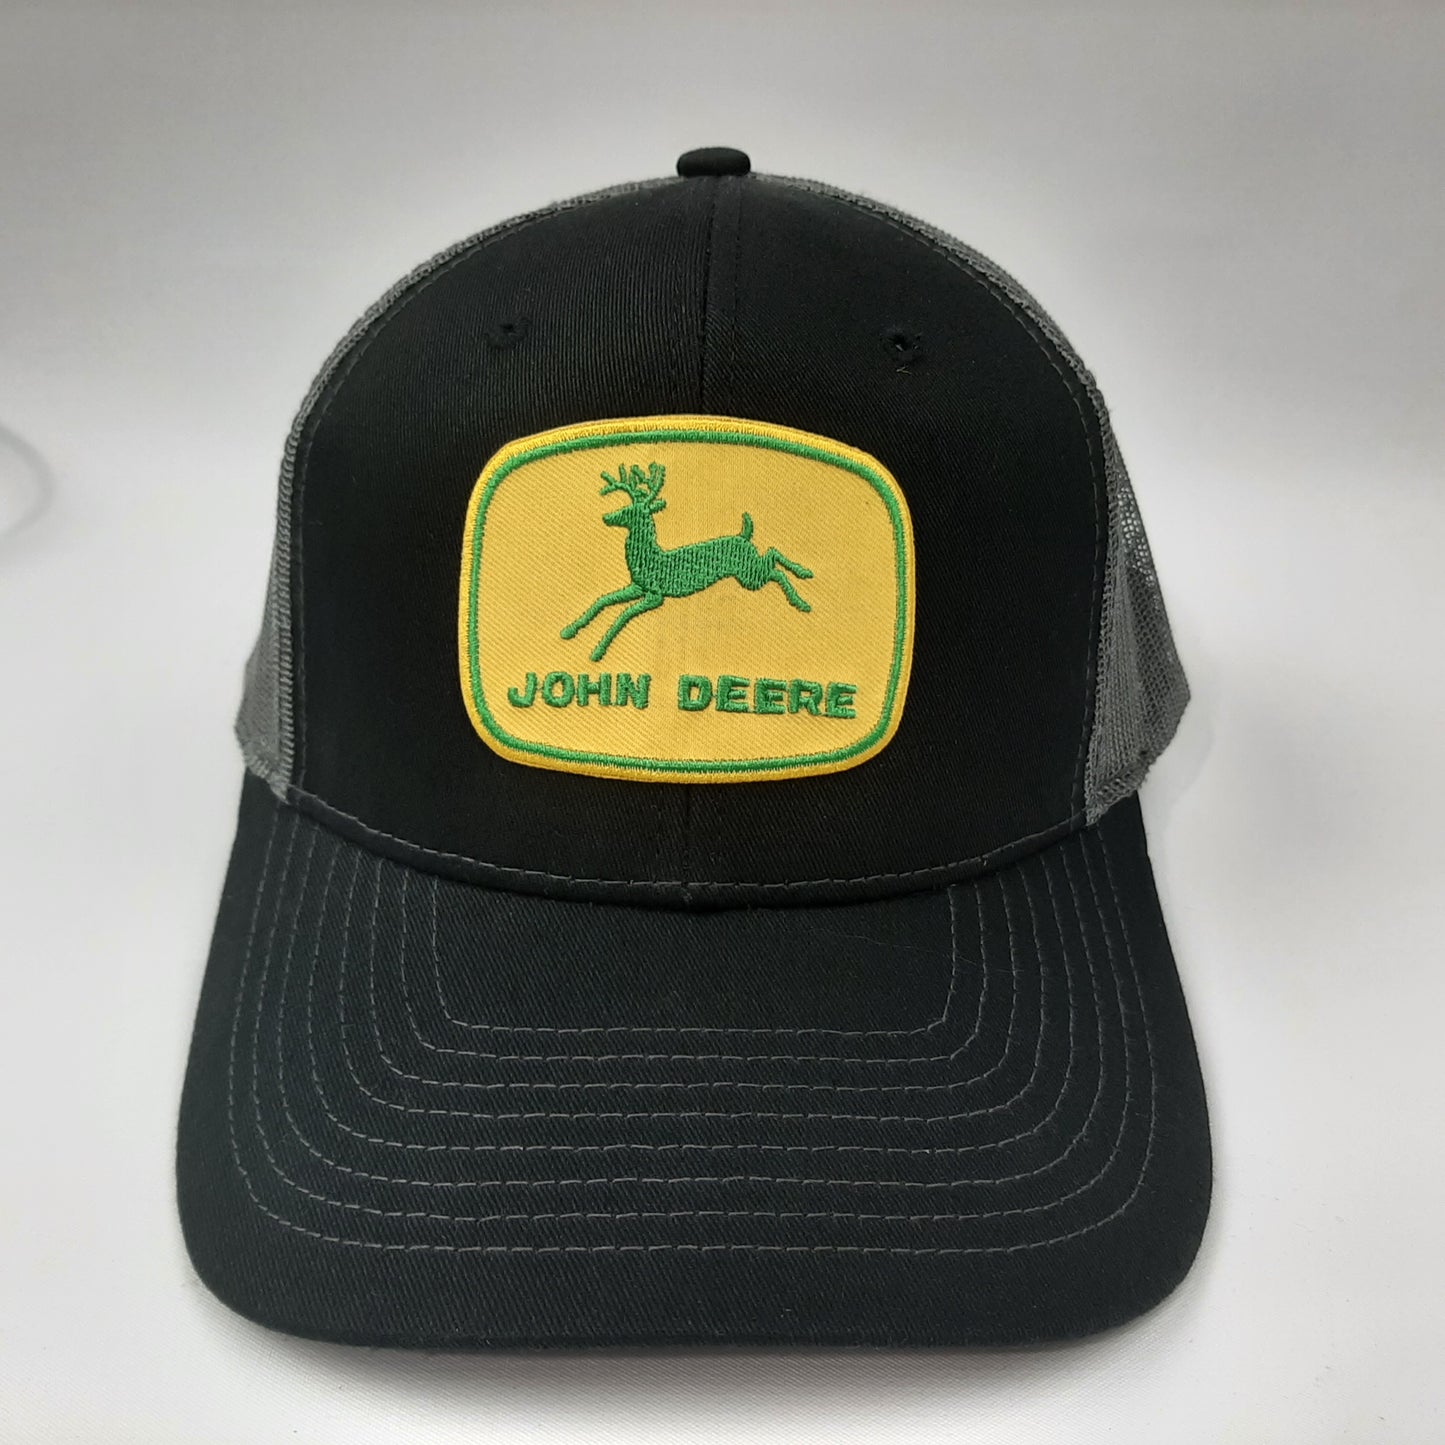 John Deere Embroidered Patch Curved Bill Mesh Snapback Cap Hat Black & Gray